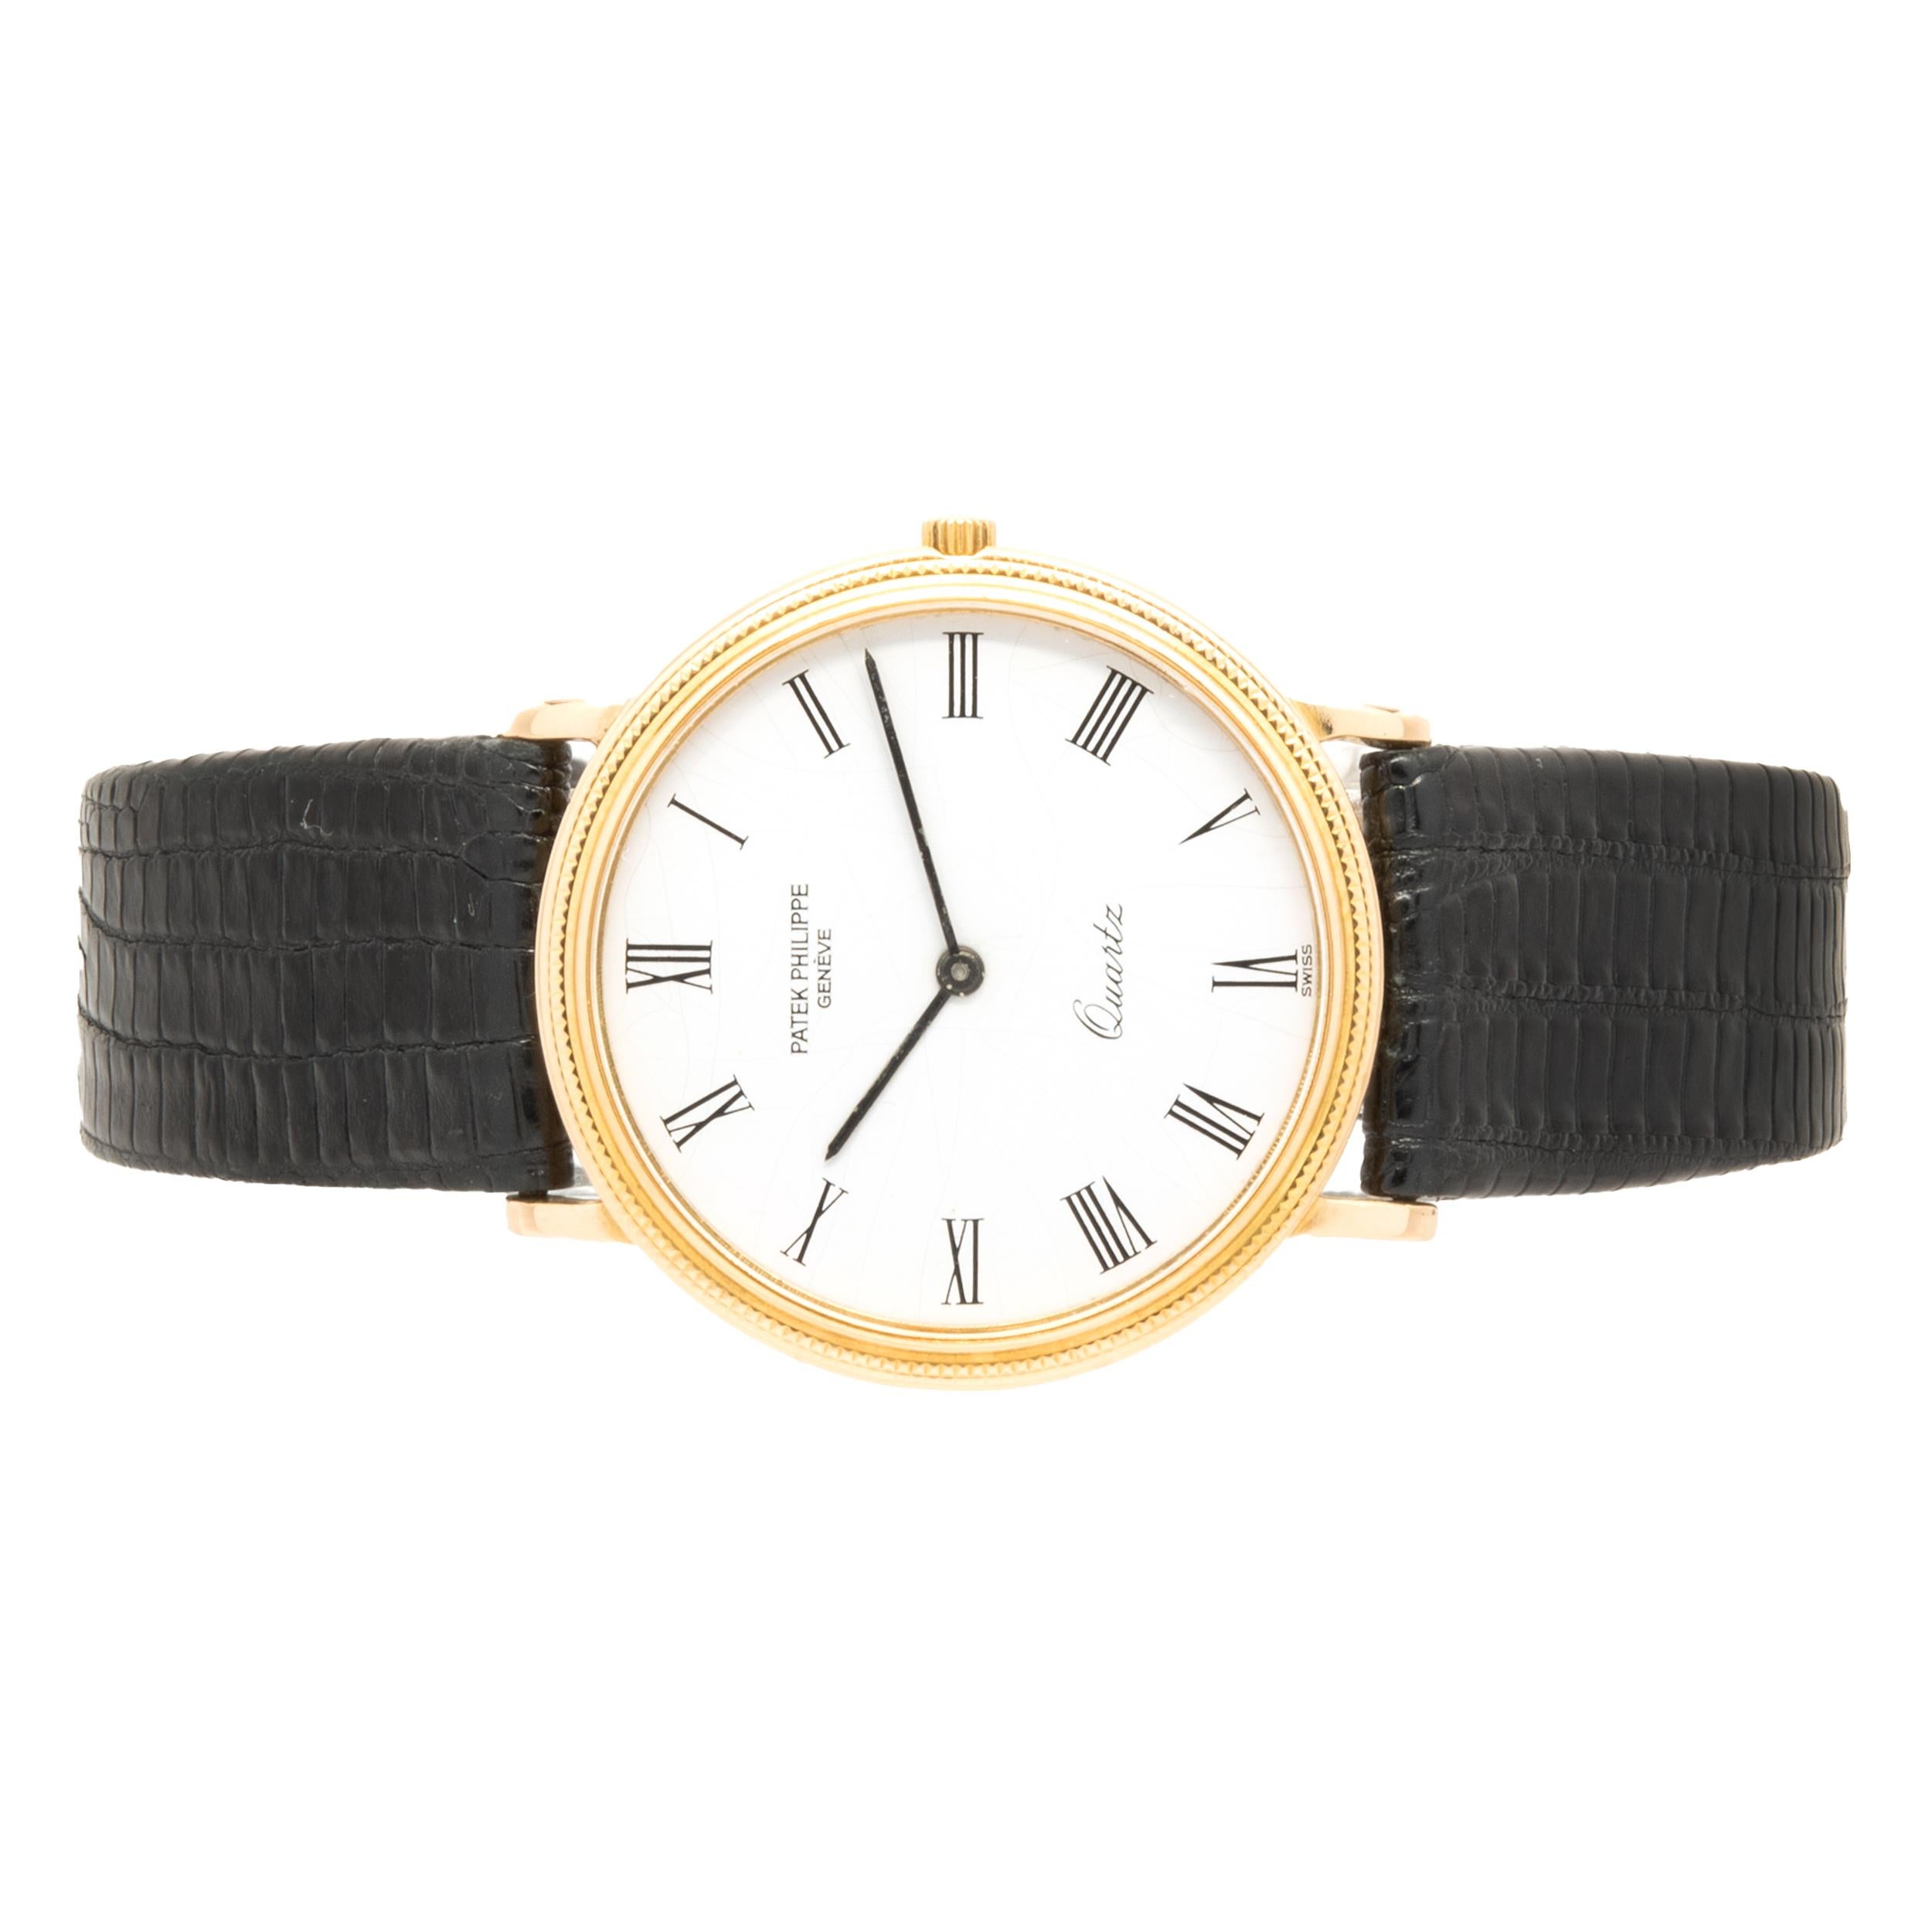 Movement: quartz
Function: hours, minutes
Case: 33mm 18K yellow gold round case, 18K yellow gold hobnail bezel, sapphire crystal, push pull crown
Band: black alligator strap, buckle
Dial: white roman
Reference: 3744
Serial: 2784XXX

Complete with